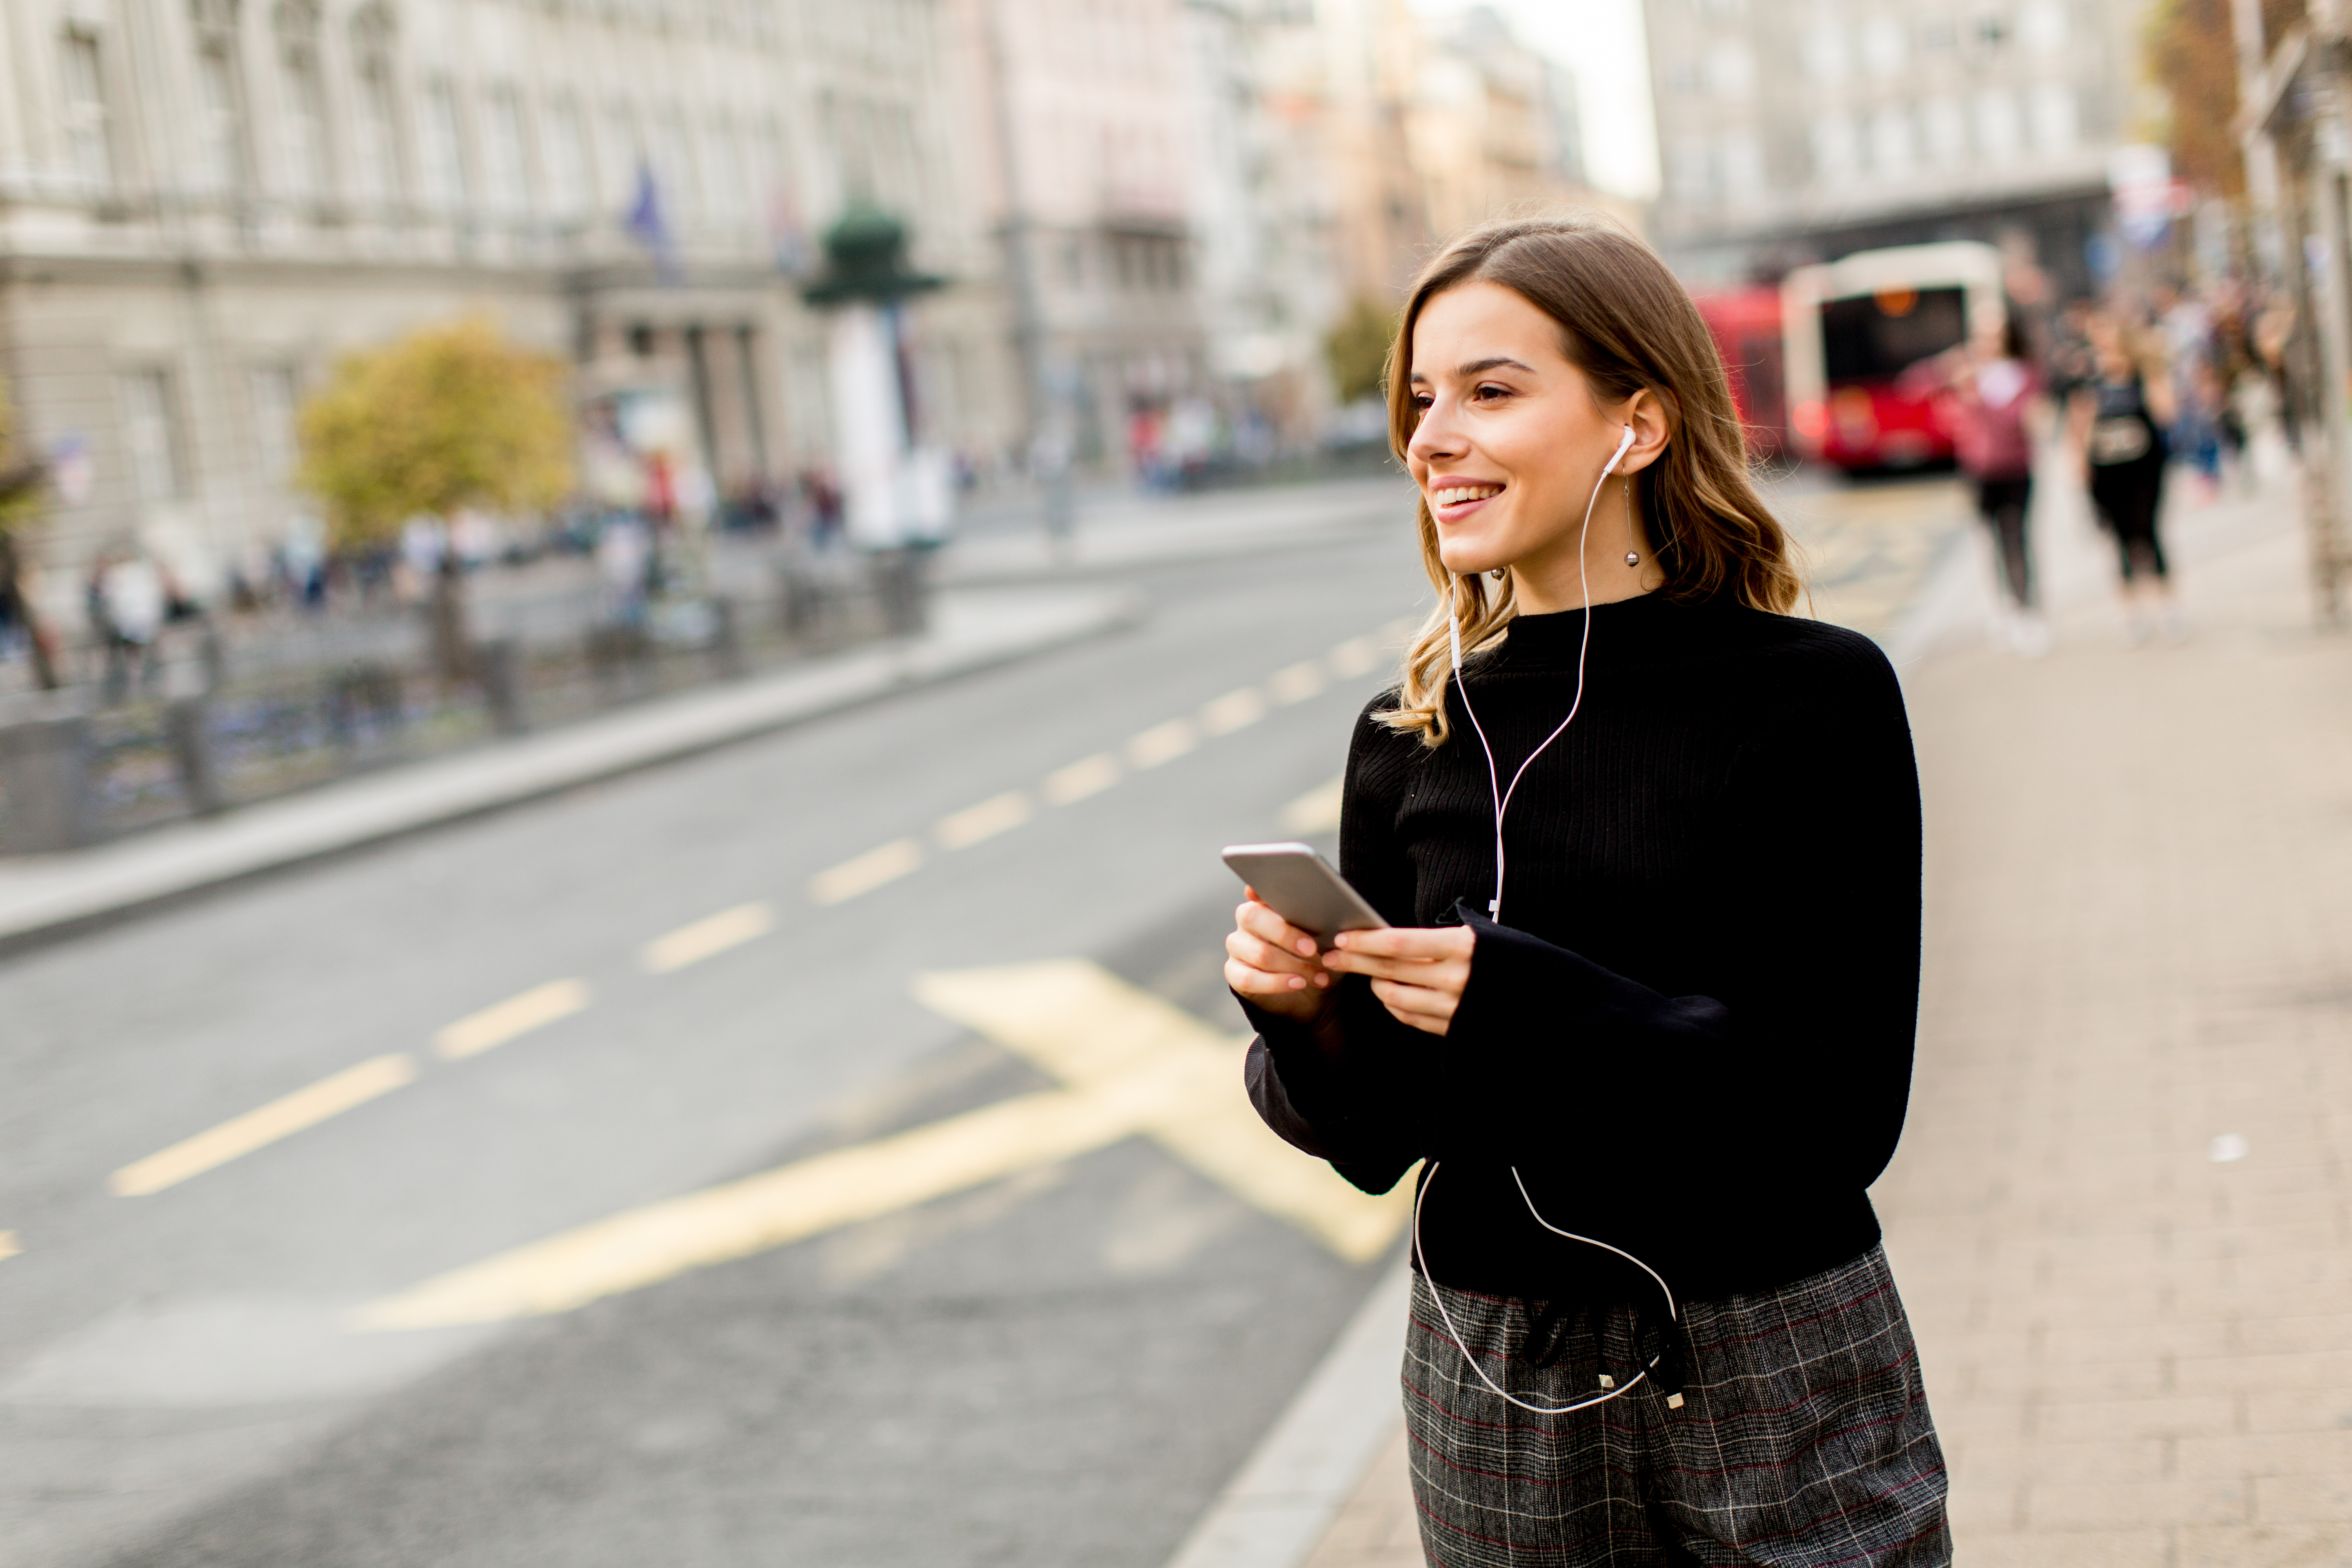 Young brunette woman using mobile while standing on street and waiting for a bus or taxi